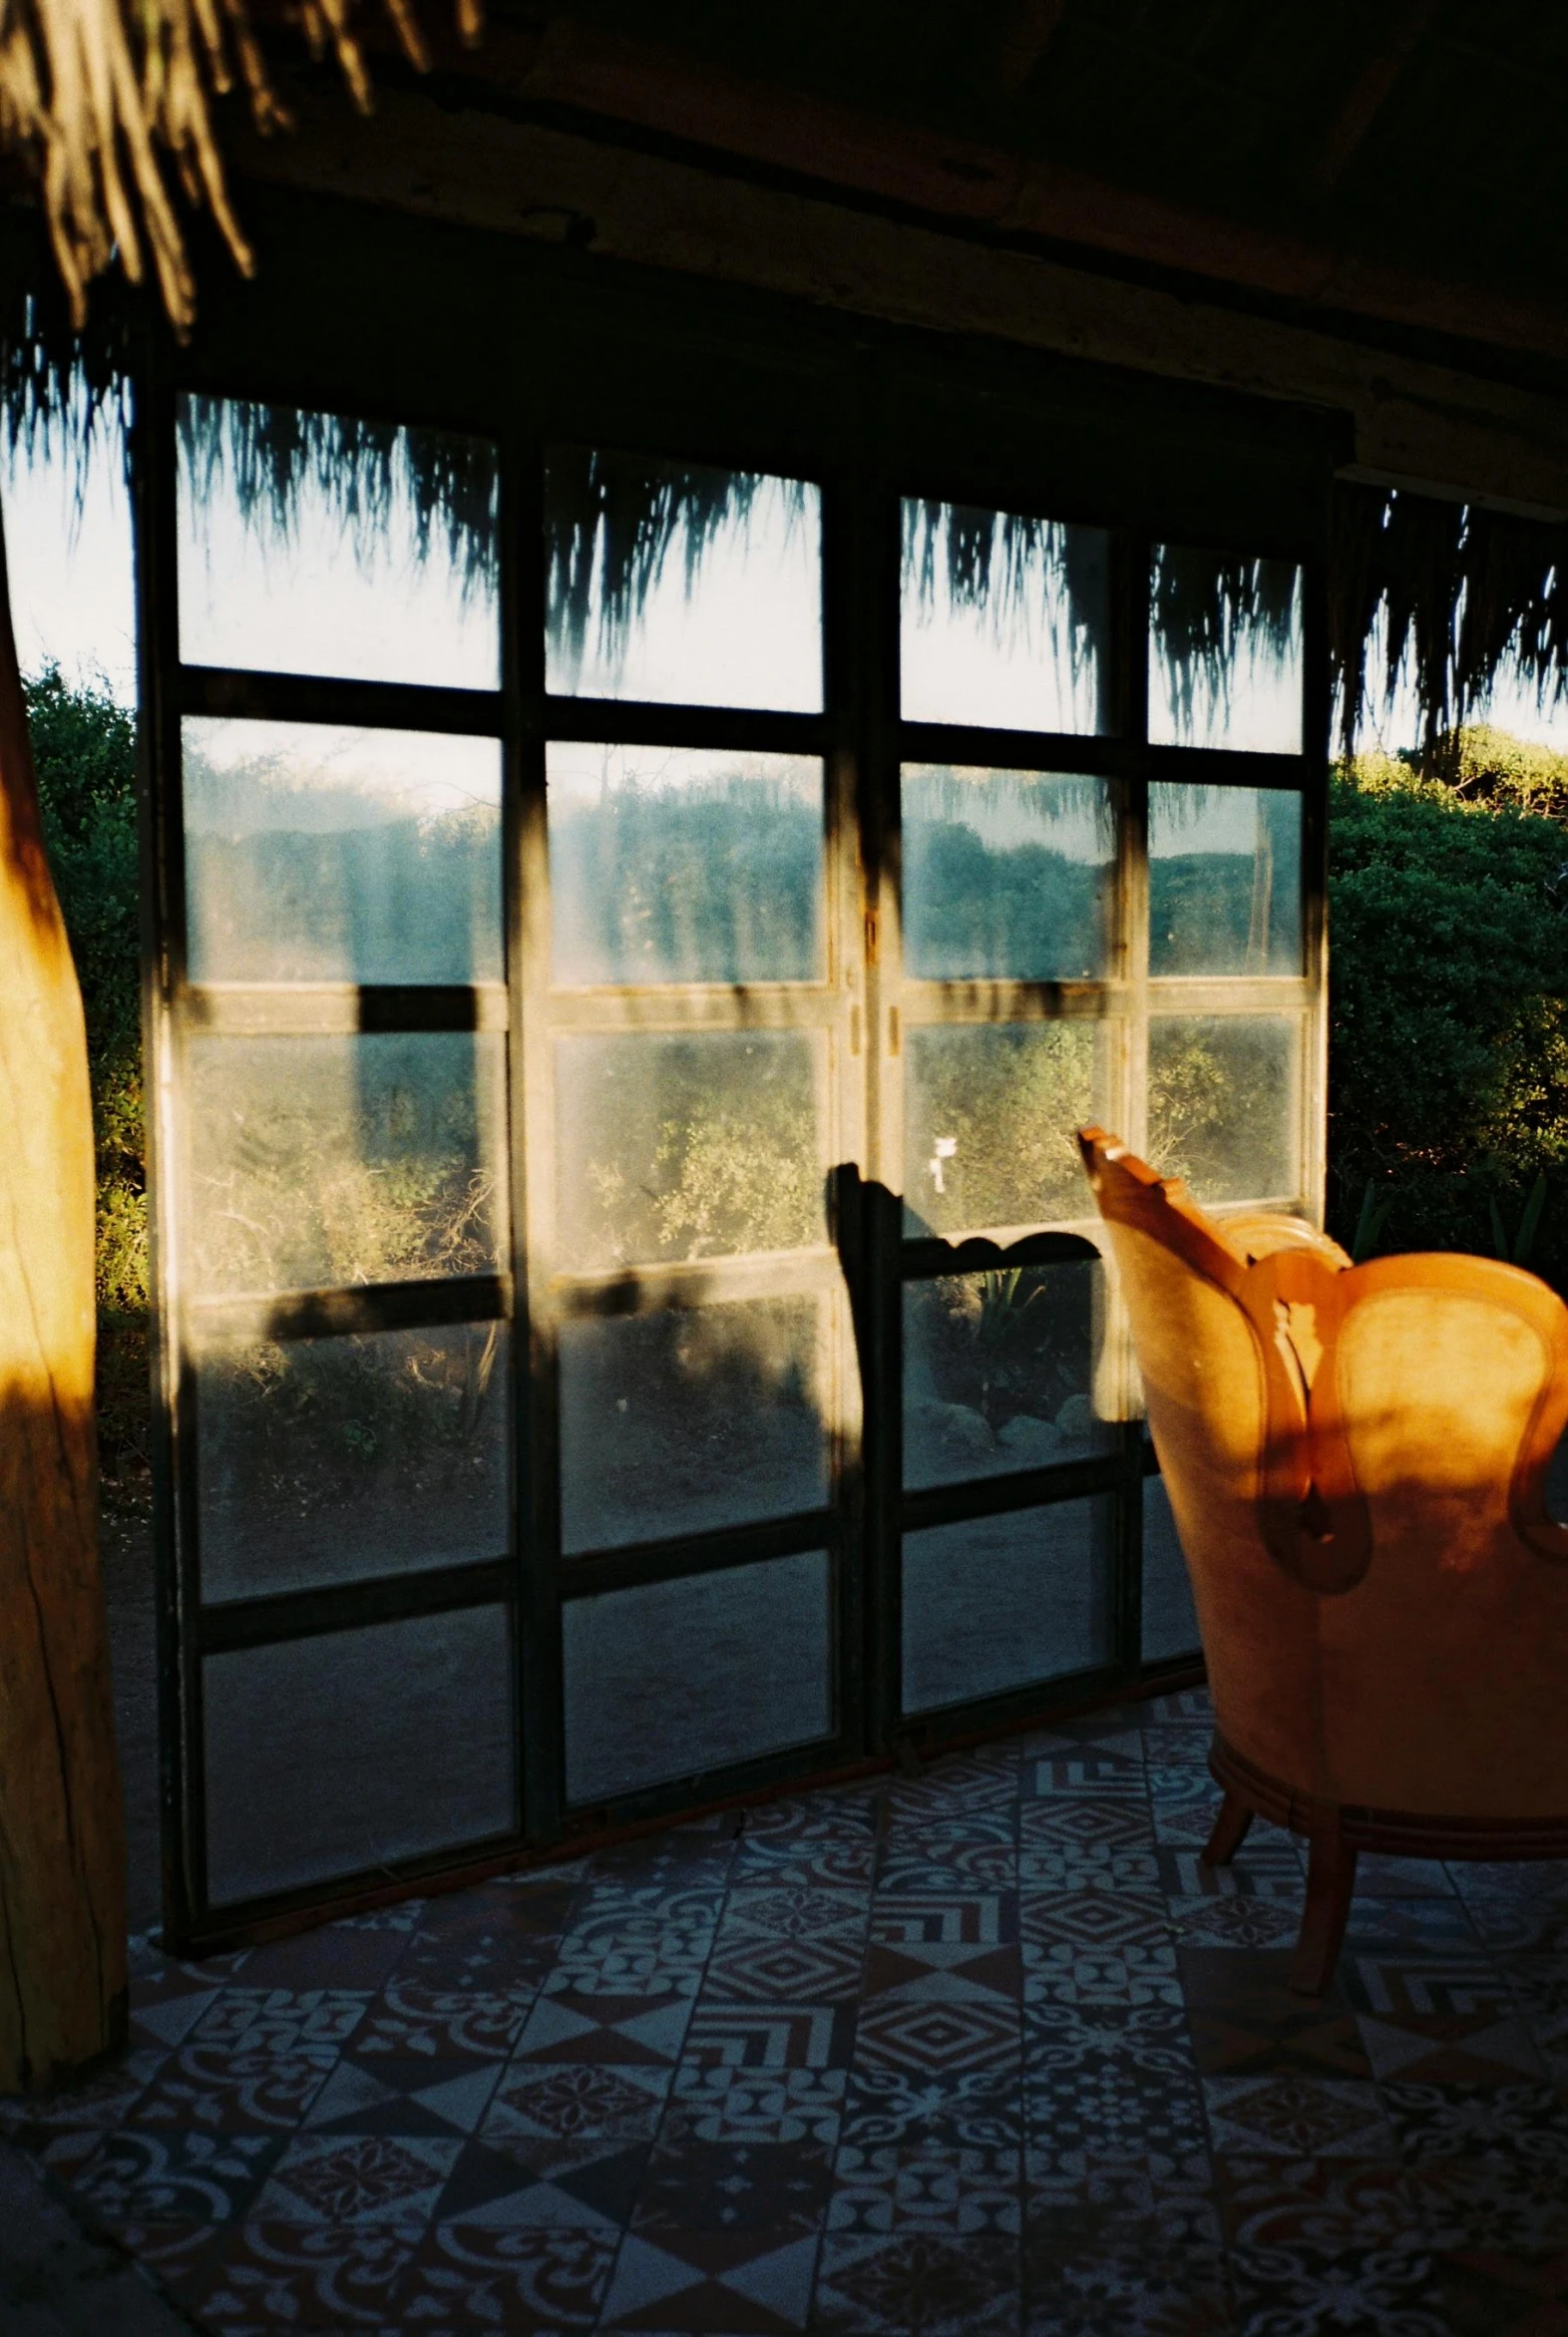 an image of a chair looking out into the open